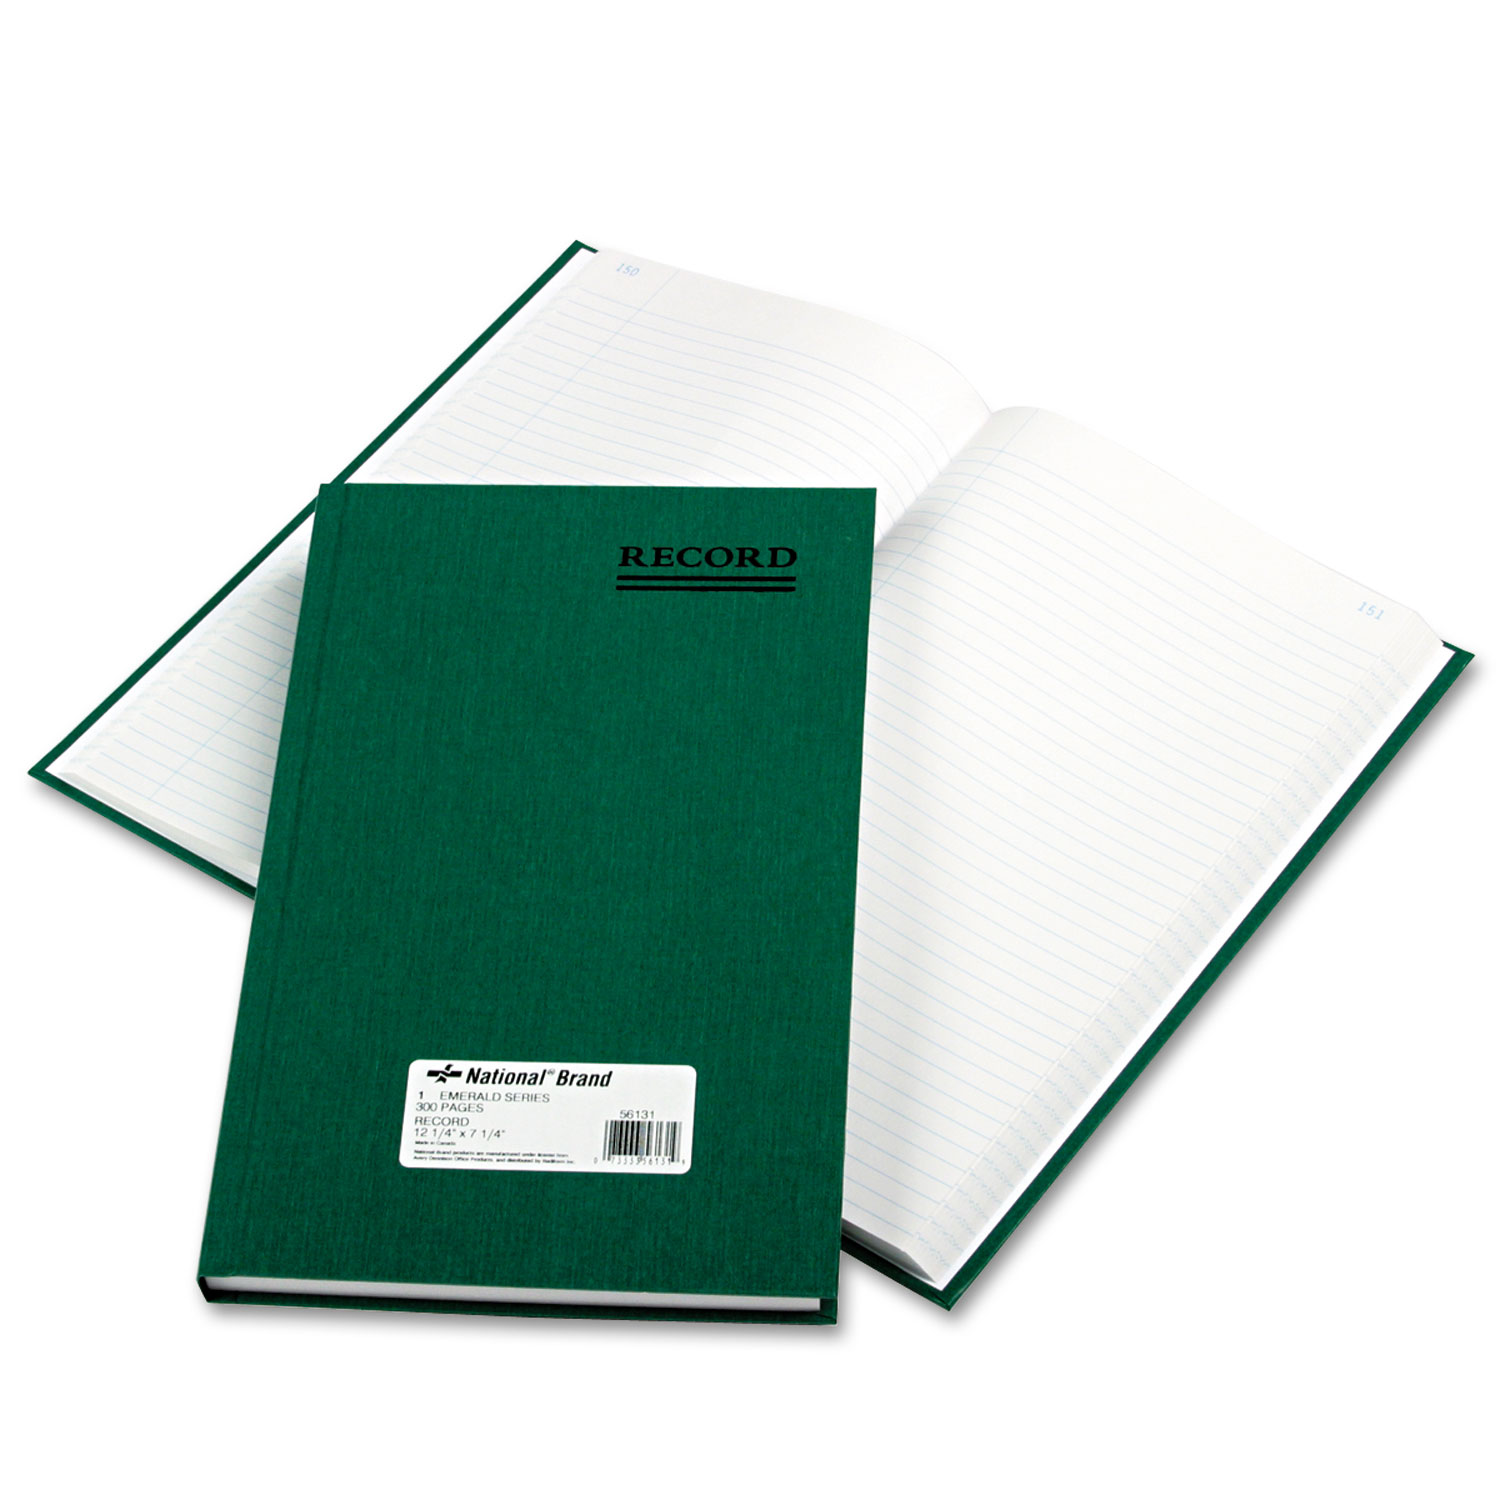 National Brand RED56131 Emerald Series Account Book, Green Cover, 300 Pages, 12 1/4 x 7 1/4